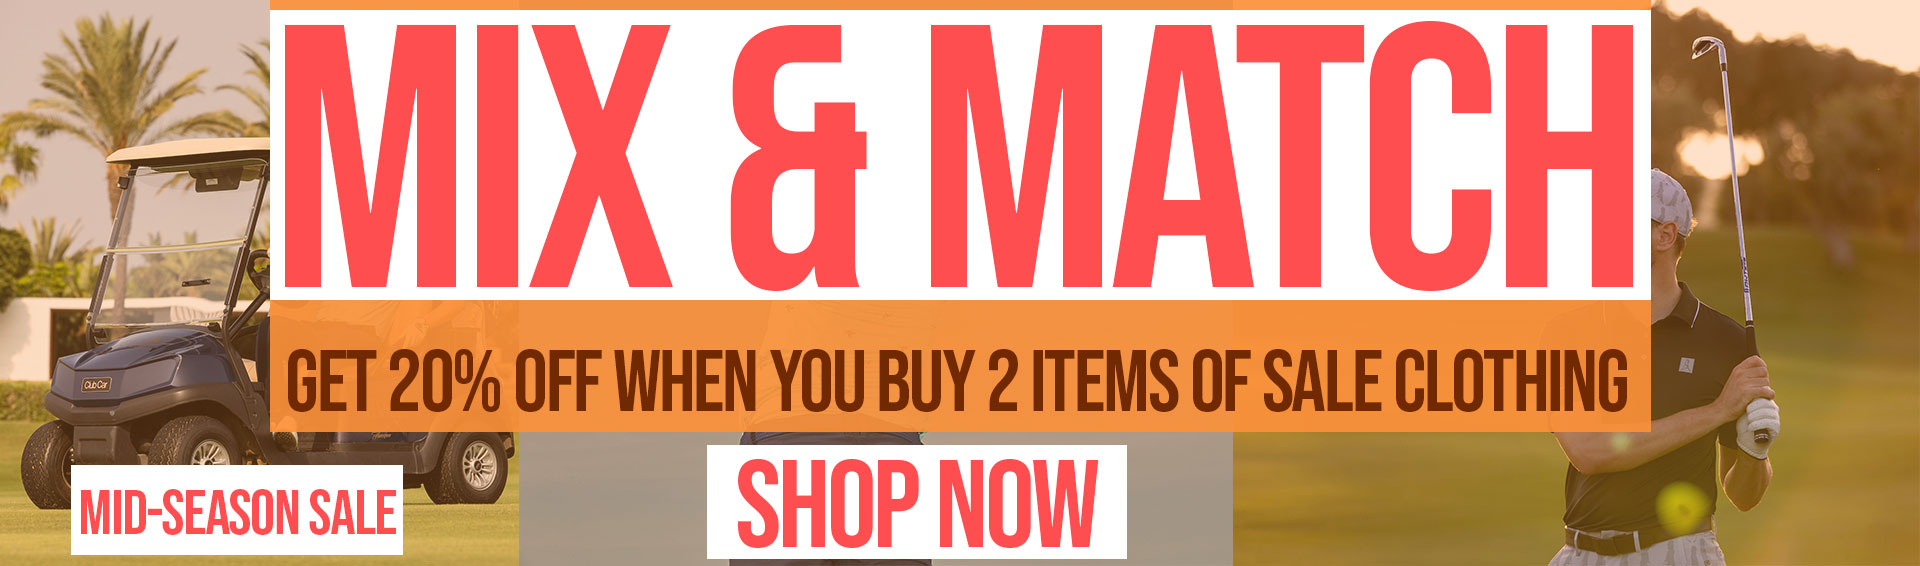 Golf Mix and Match Sale Clothing Banner